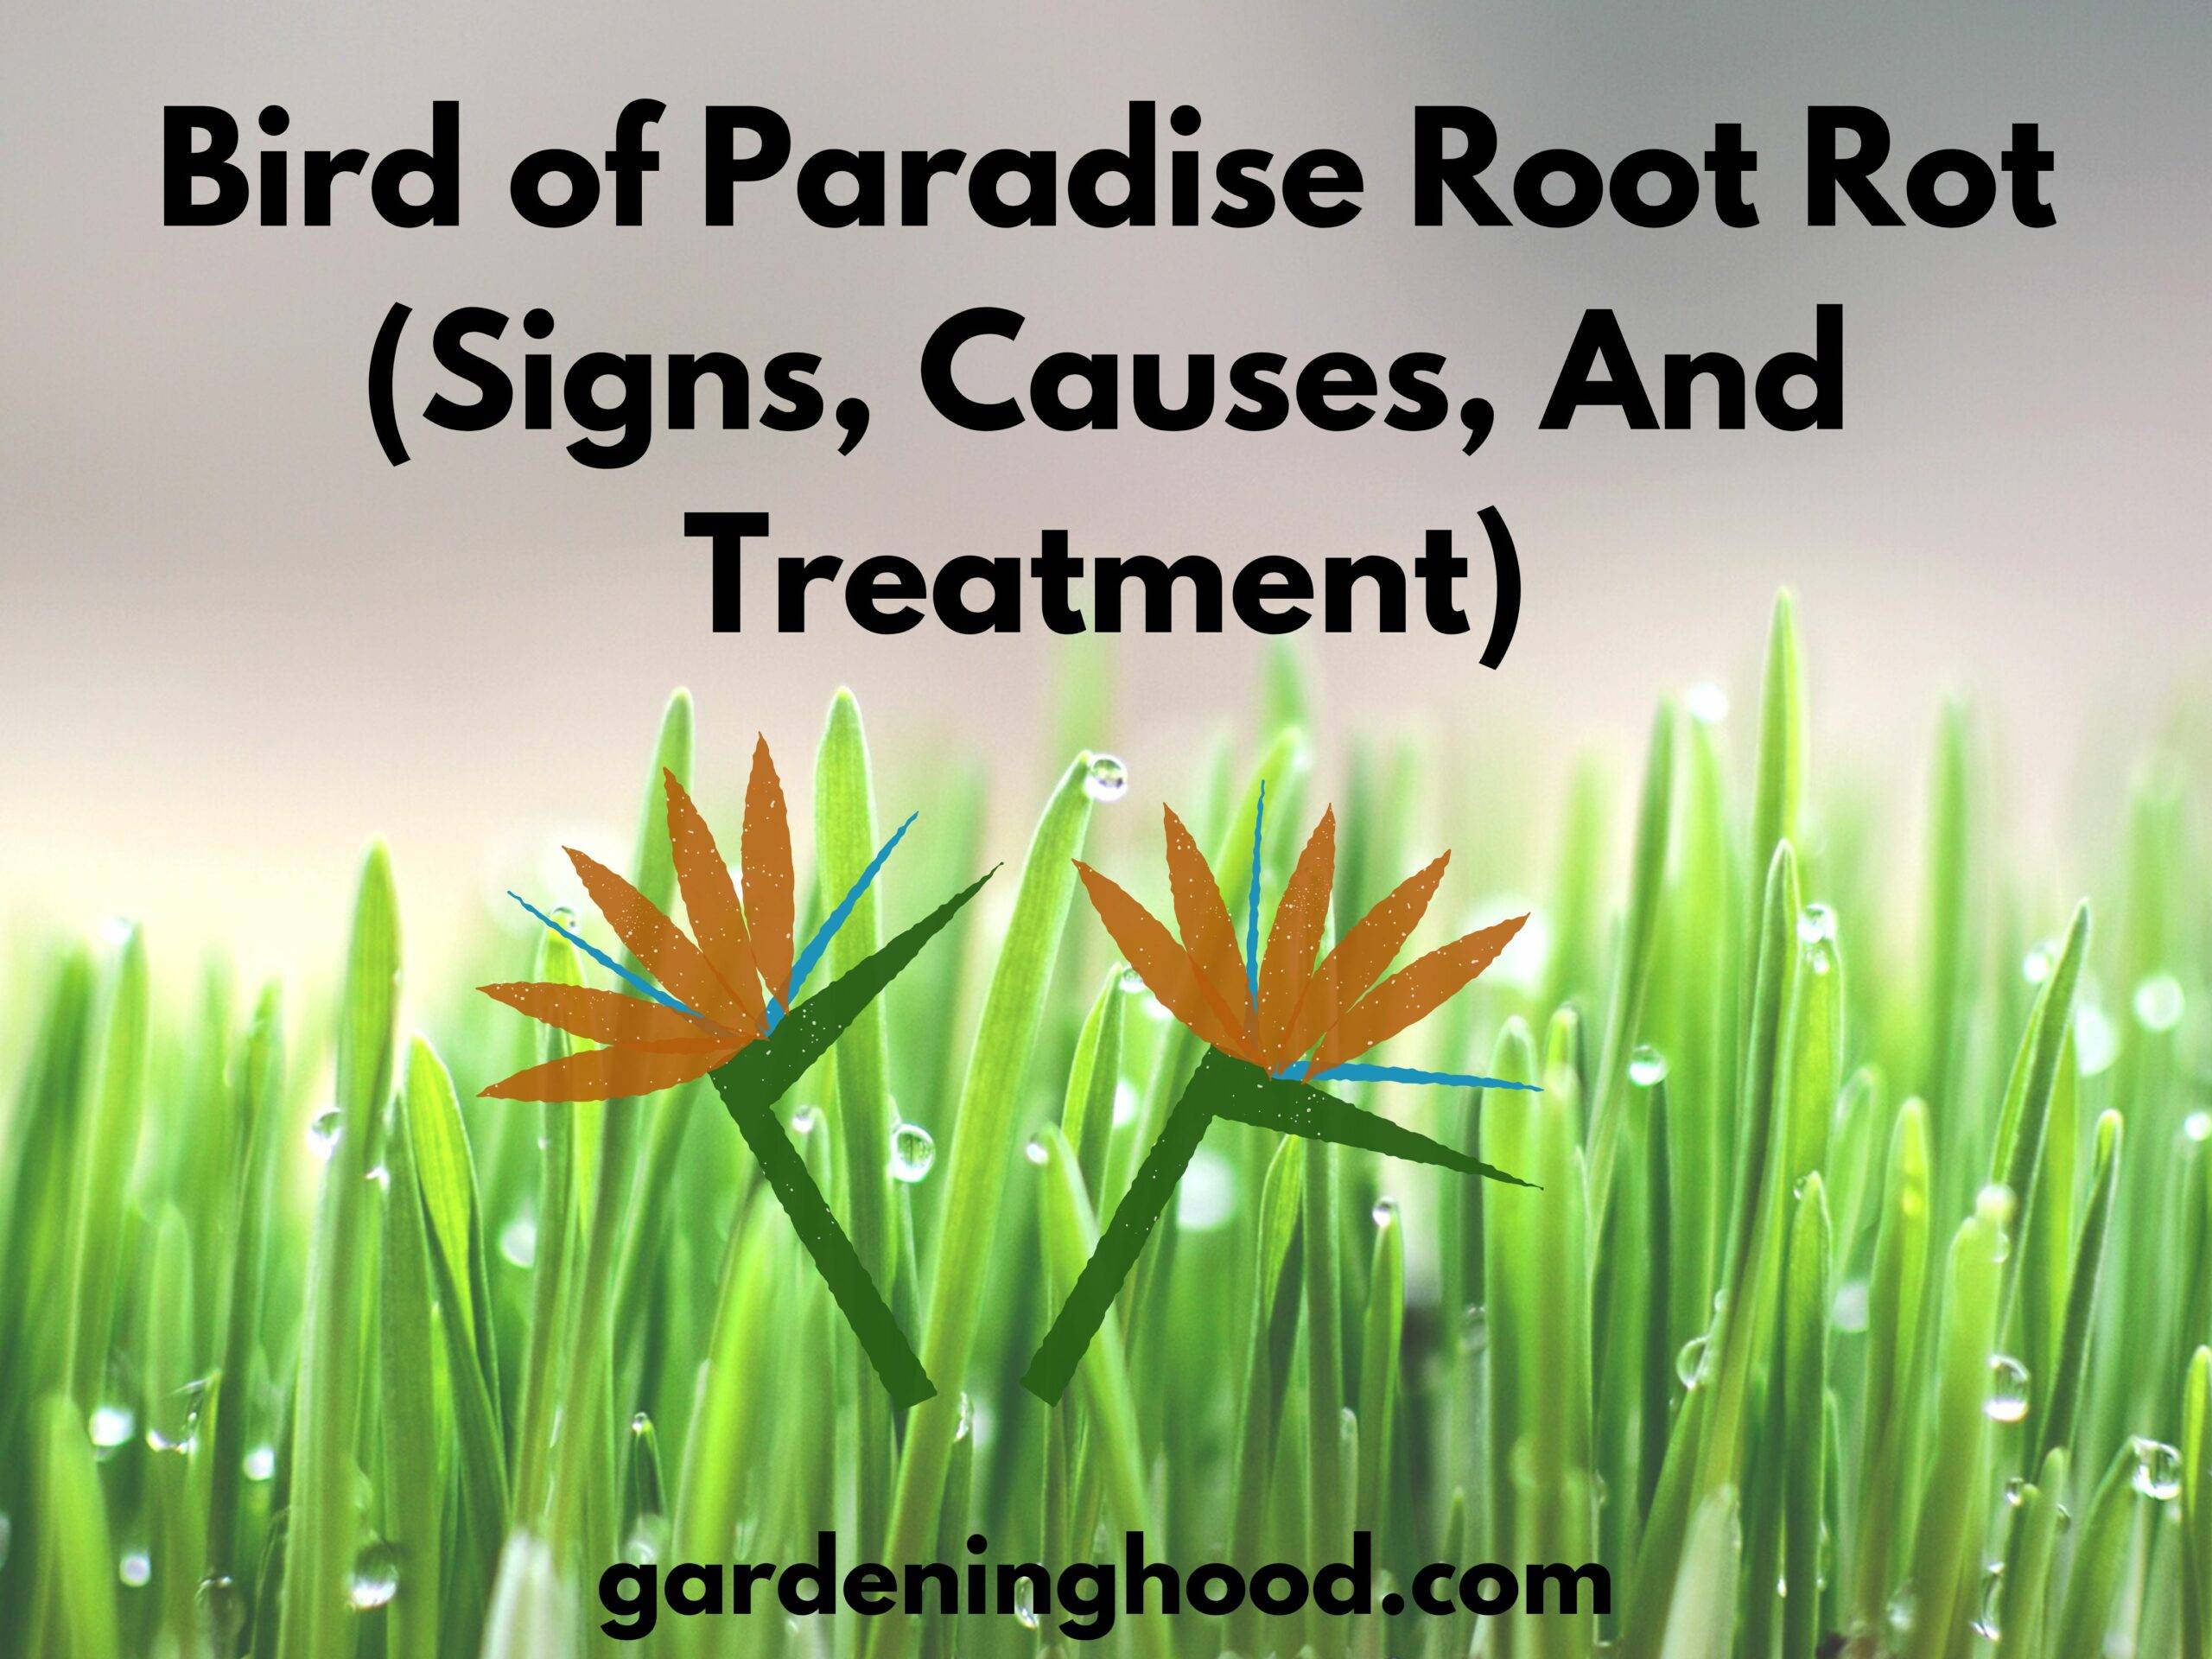 Bird of Paradise Root Rot (Signs, Causes, And Treatment)